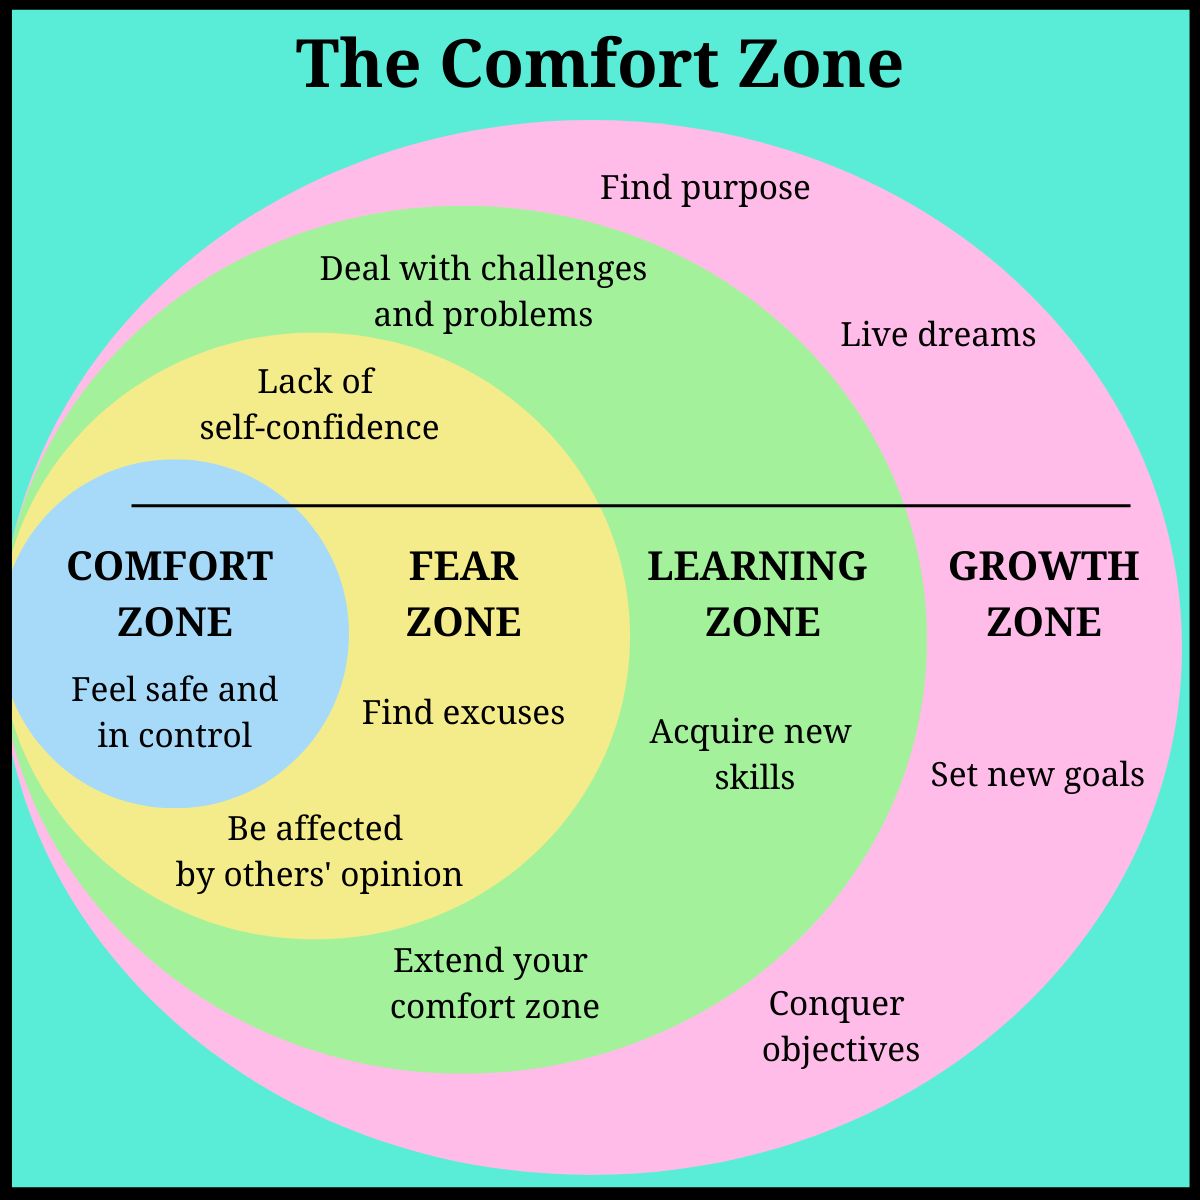 National Train Your Brain Day: Push through the fear & step out of your comfort zone!